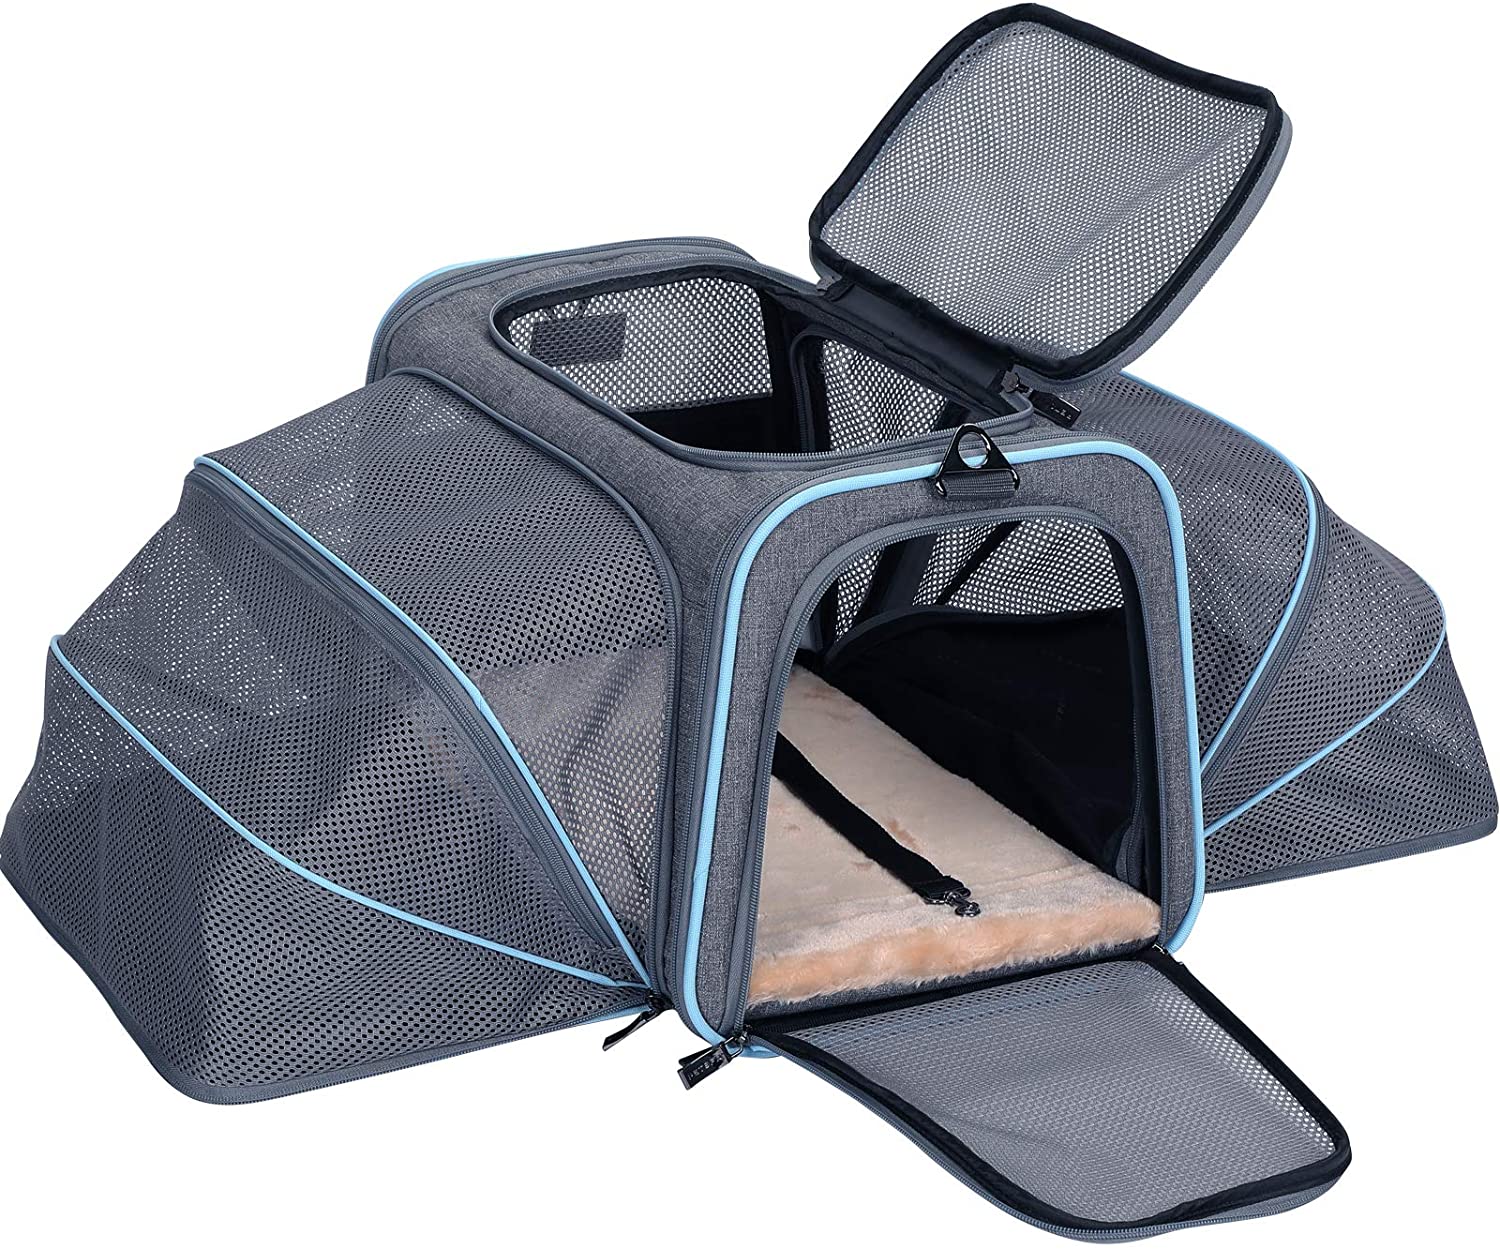 Petsfit Most Airline Approved Cat Carrier Dog Carriers,Large Capacity Lightweight Washable Soft-Sided Pet Travel Carrier for Other Samll Animal with 5-Sided Breathable mesh 